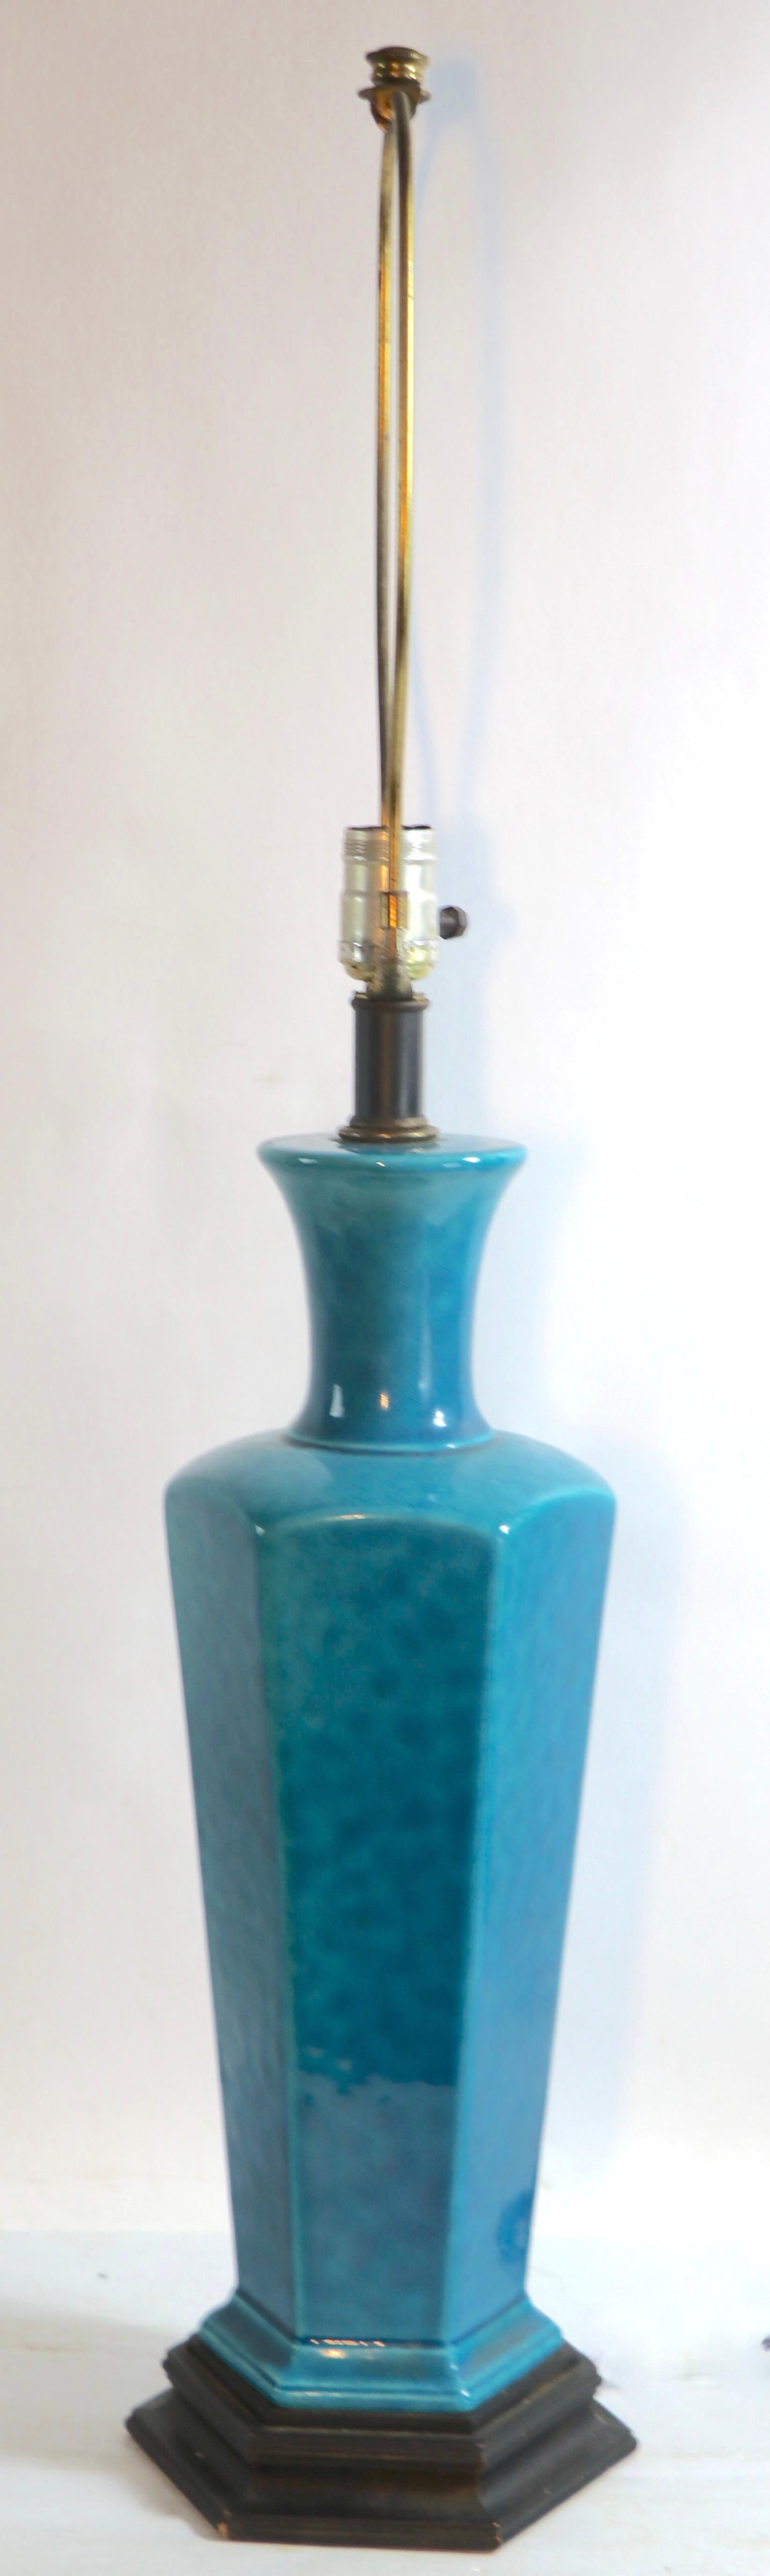 Ceramic Asia Modern Chinese Style Table Lamp in Blue Craquelure Glaze Finish